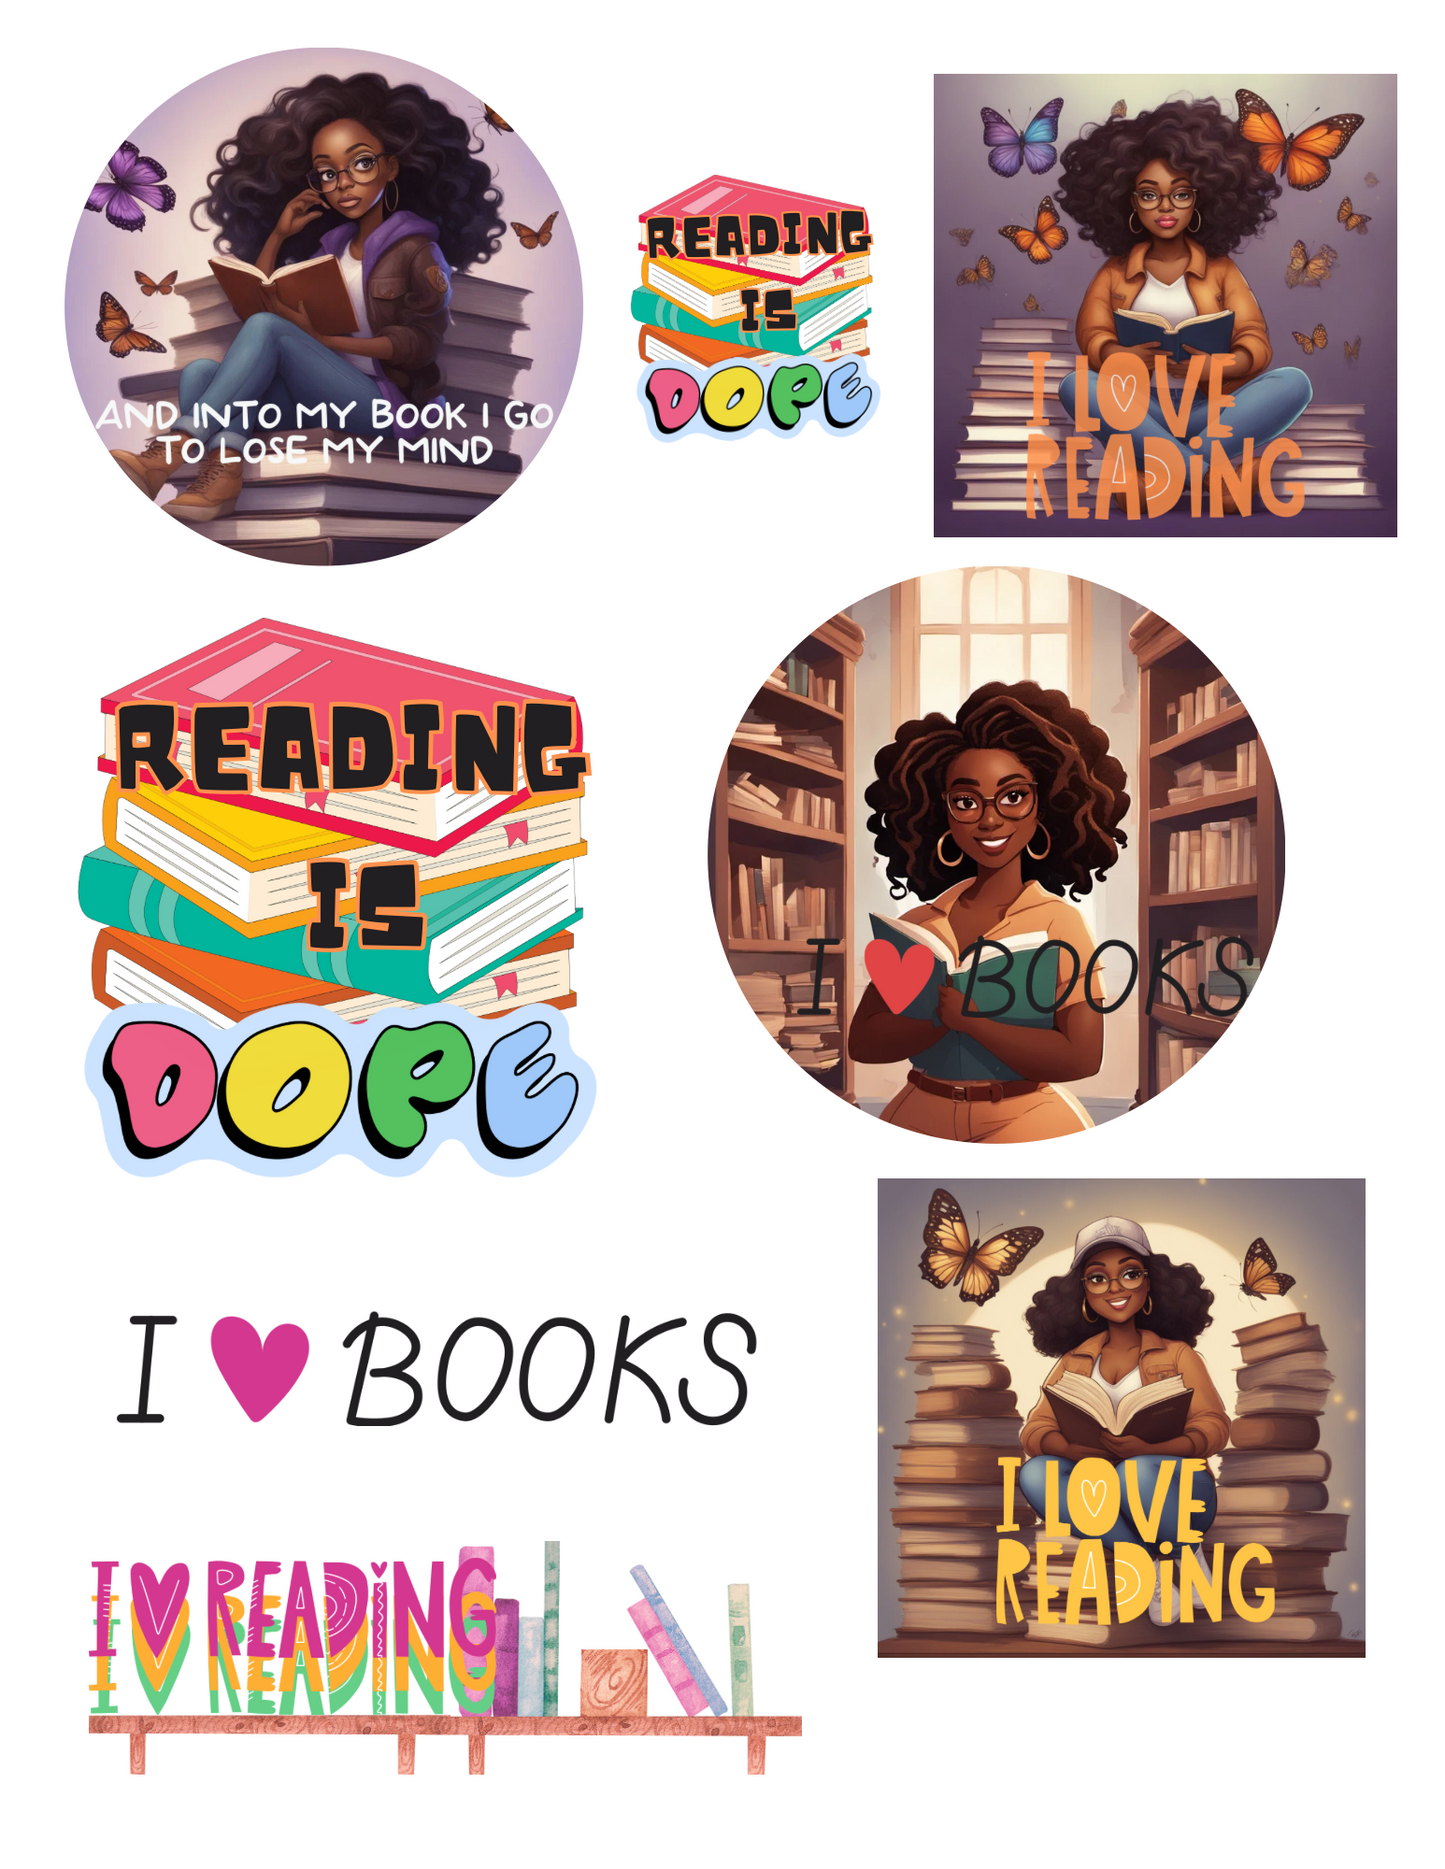 Reading is dope Melanin sticker packs ready to ship